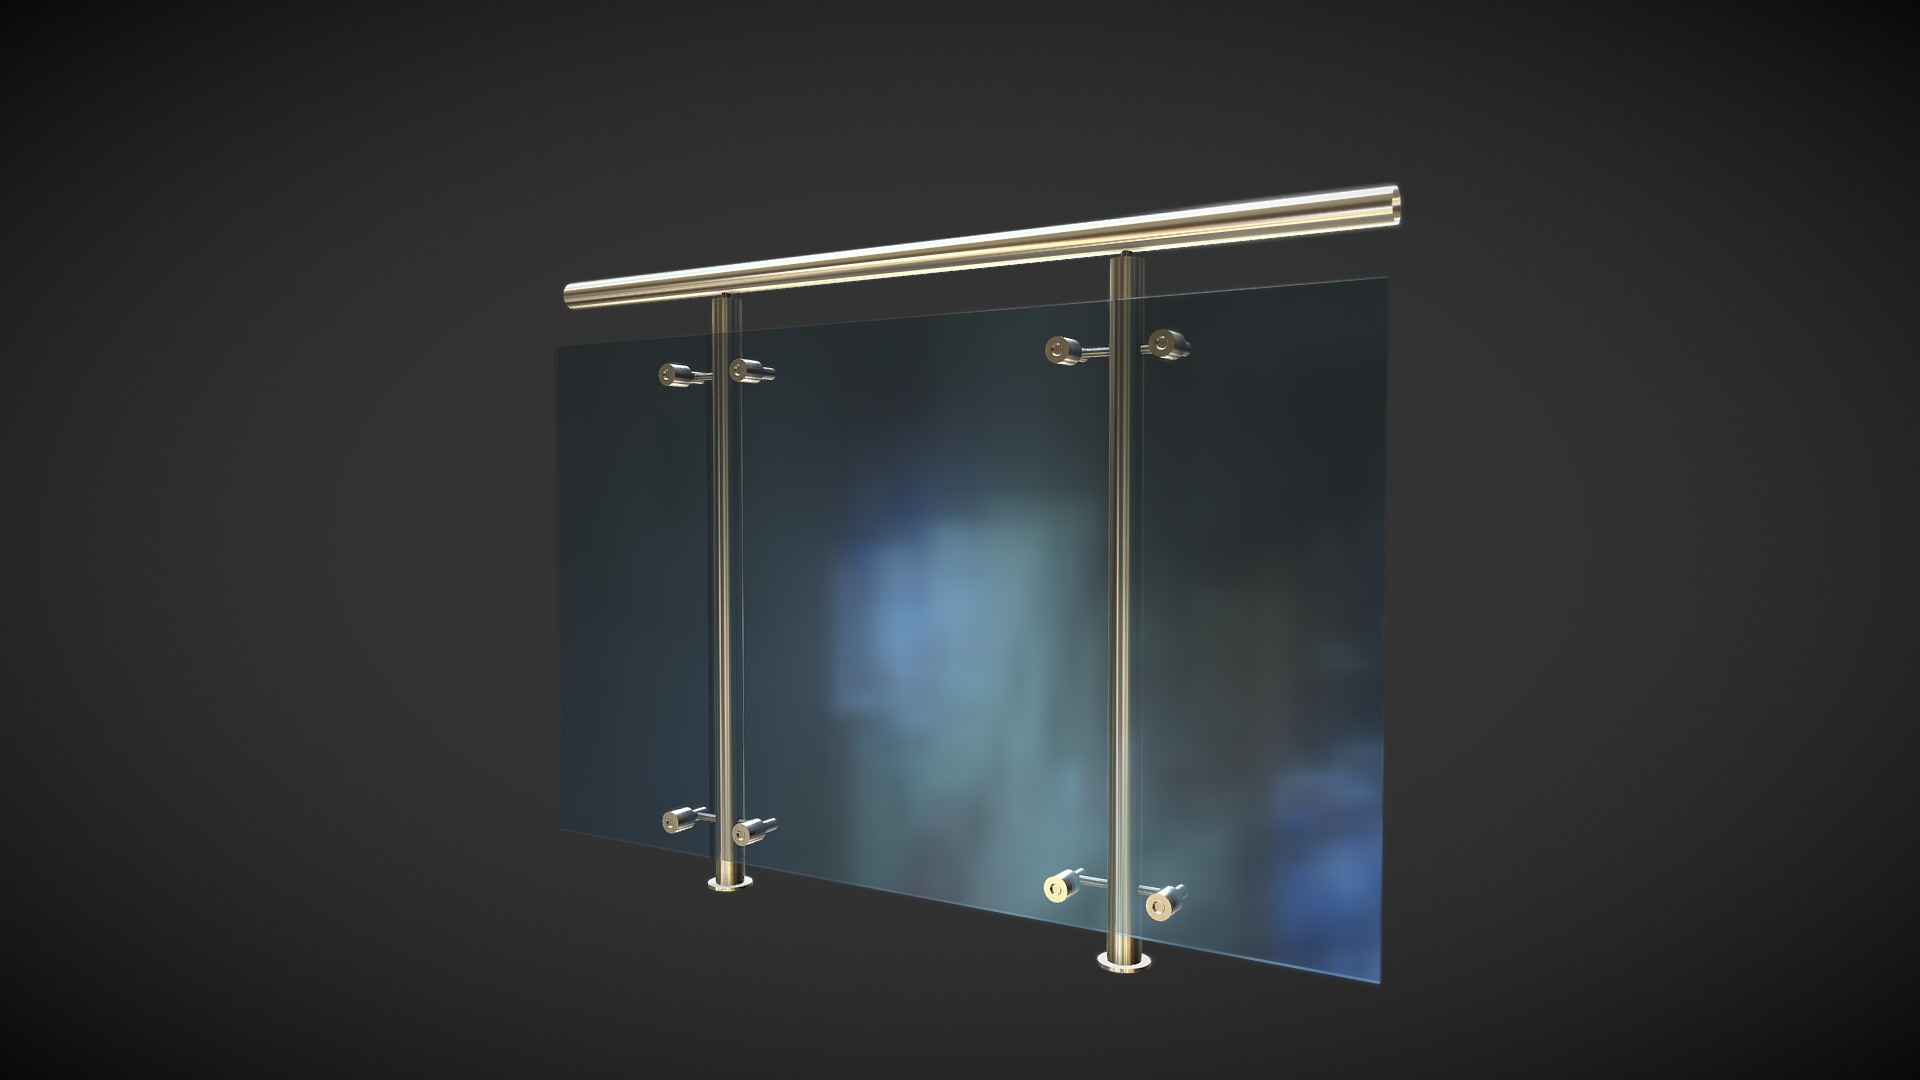 3D model railing - This is a 3D model of the railing. The 3D model is about a light fixture from a ceiling.